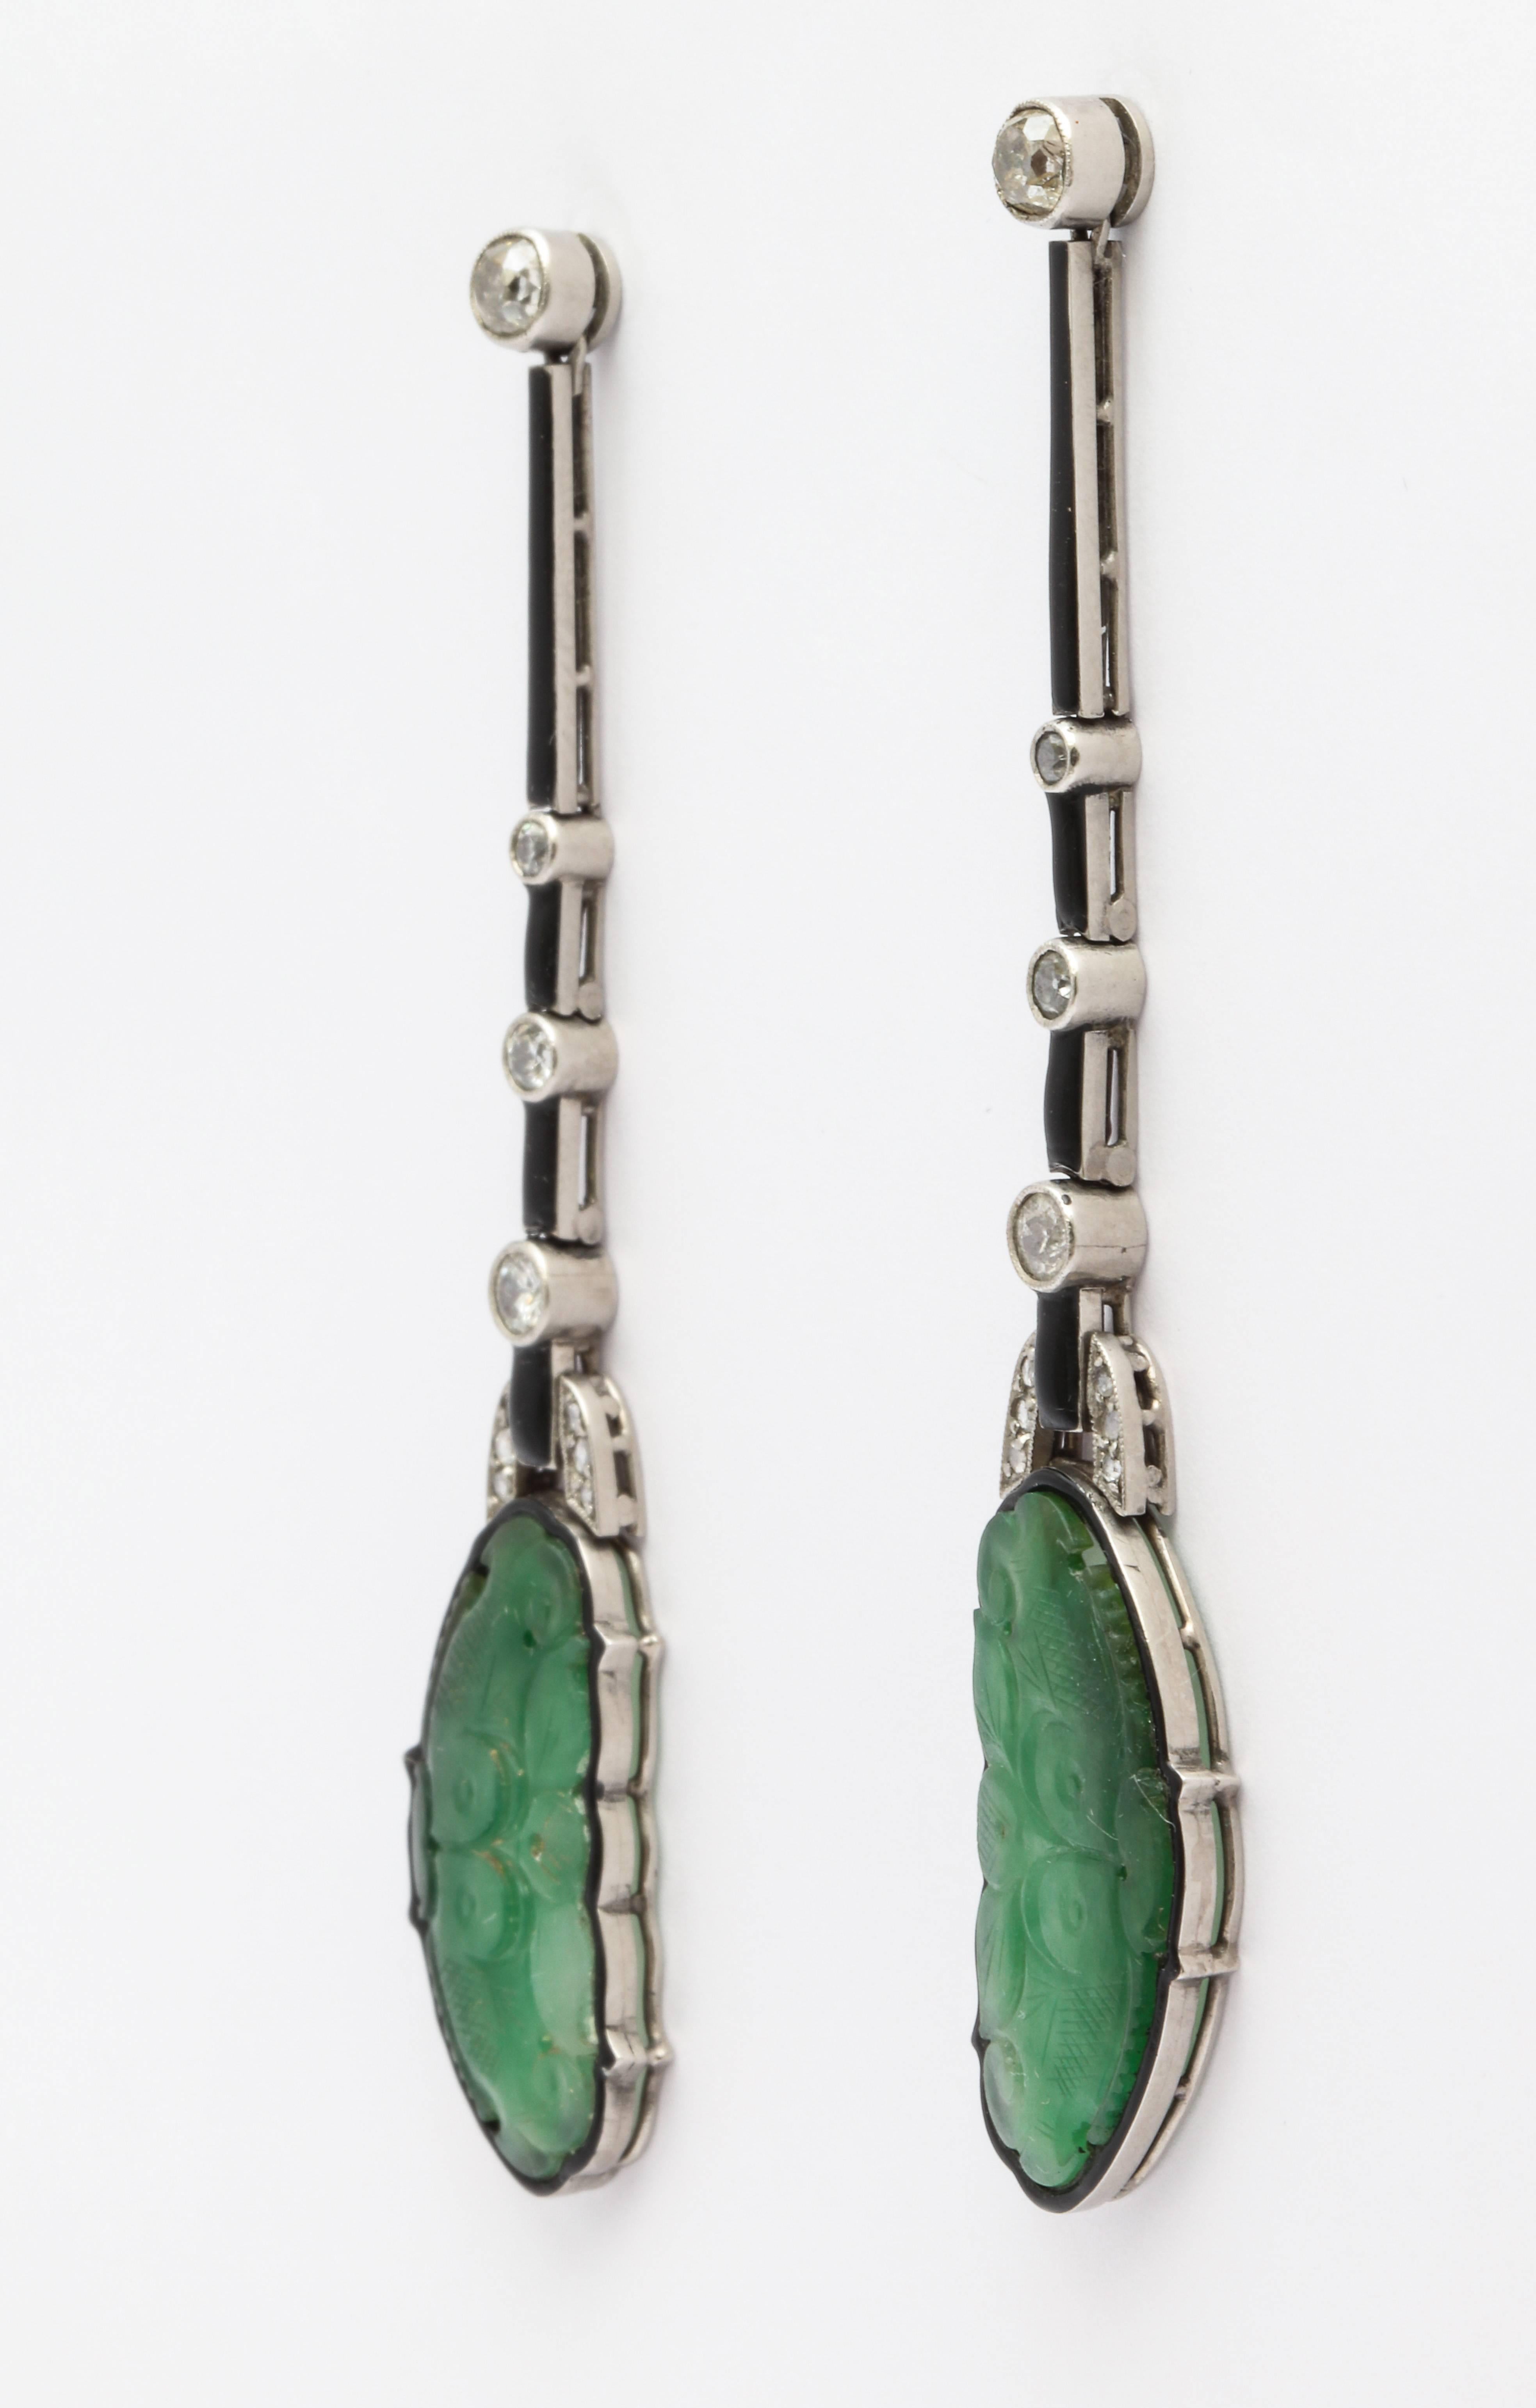 Art Deco earring with carved Jade depicting two fish kissing. Diamond accents weigh approximately 0.75carats total and fine black enamel detail give this antique earrings a special charm.